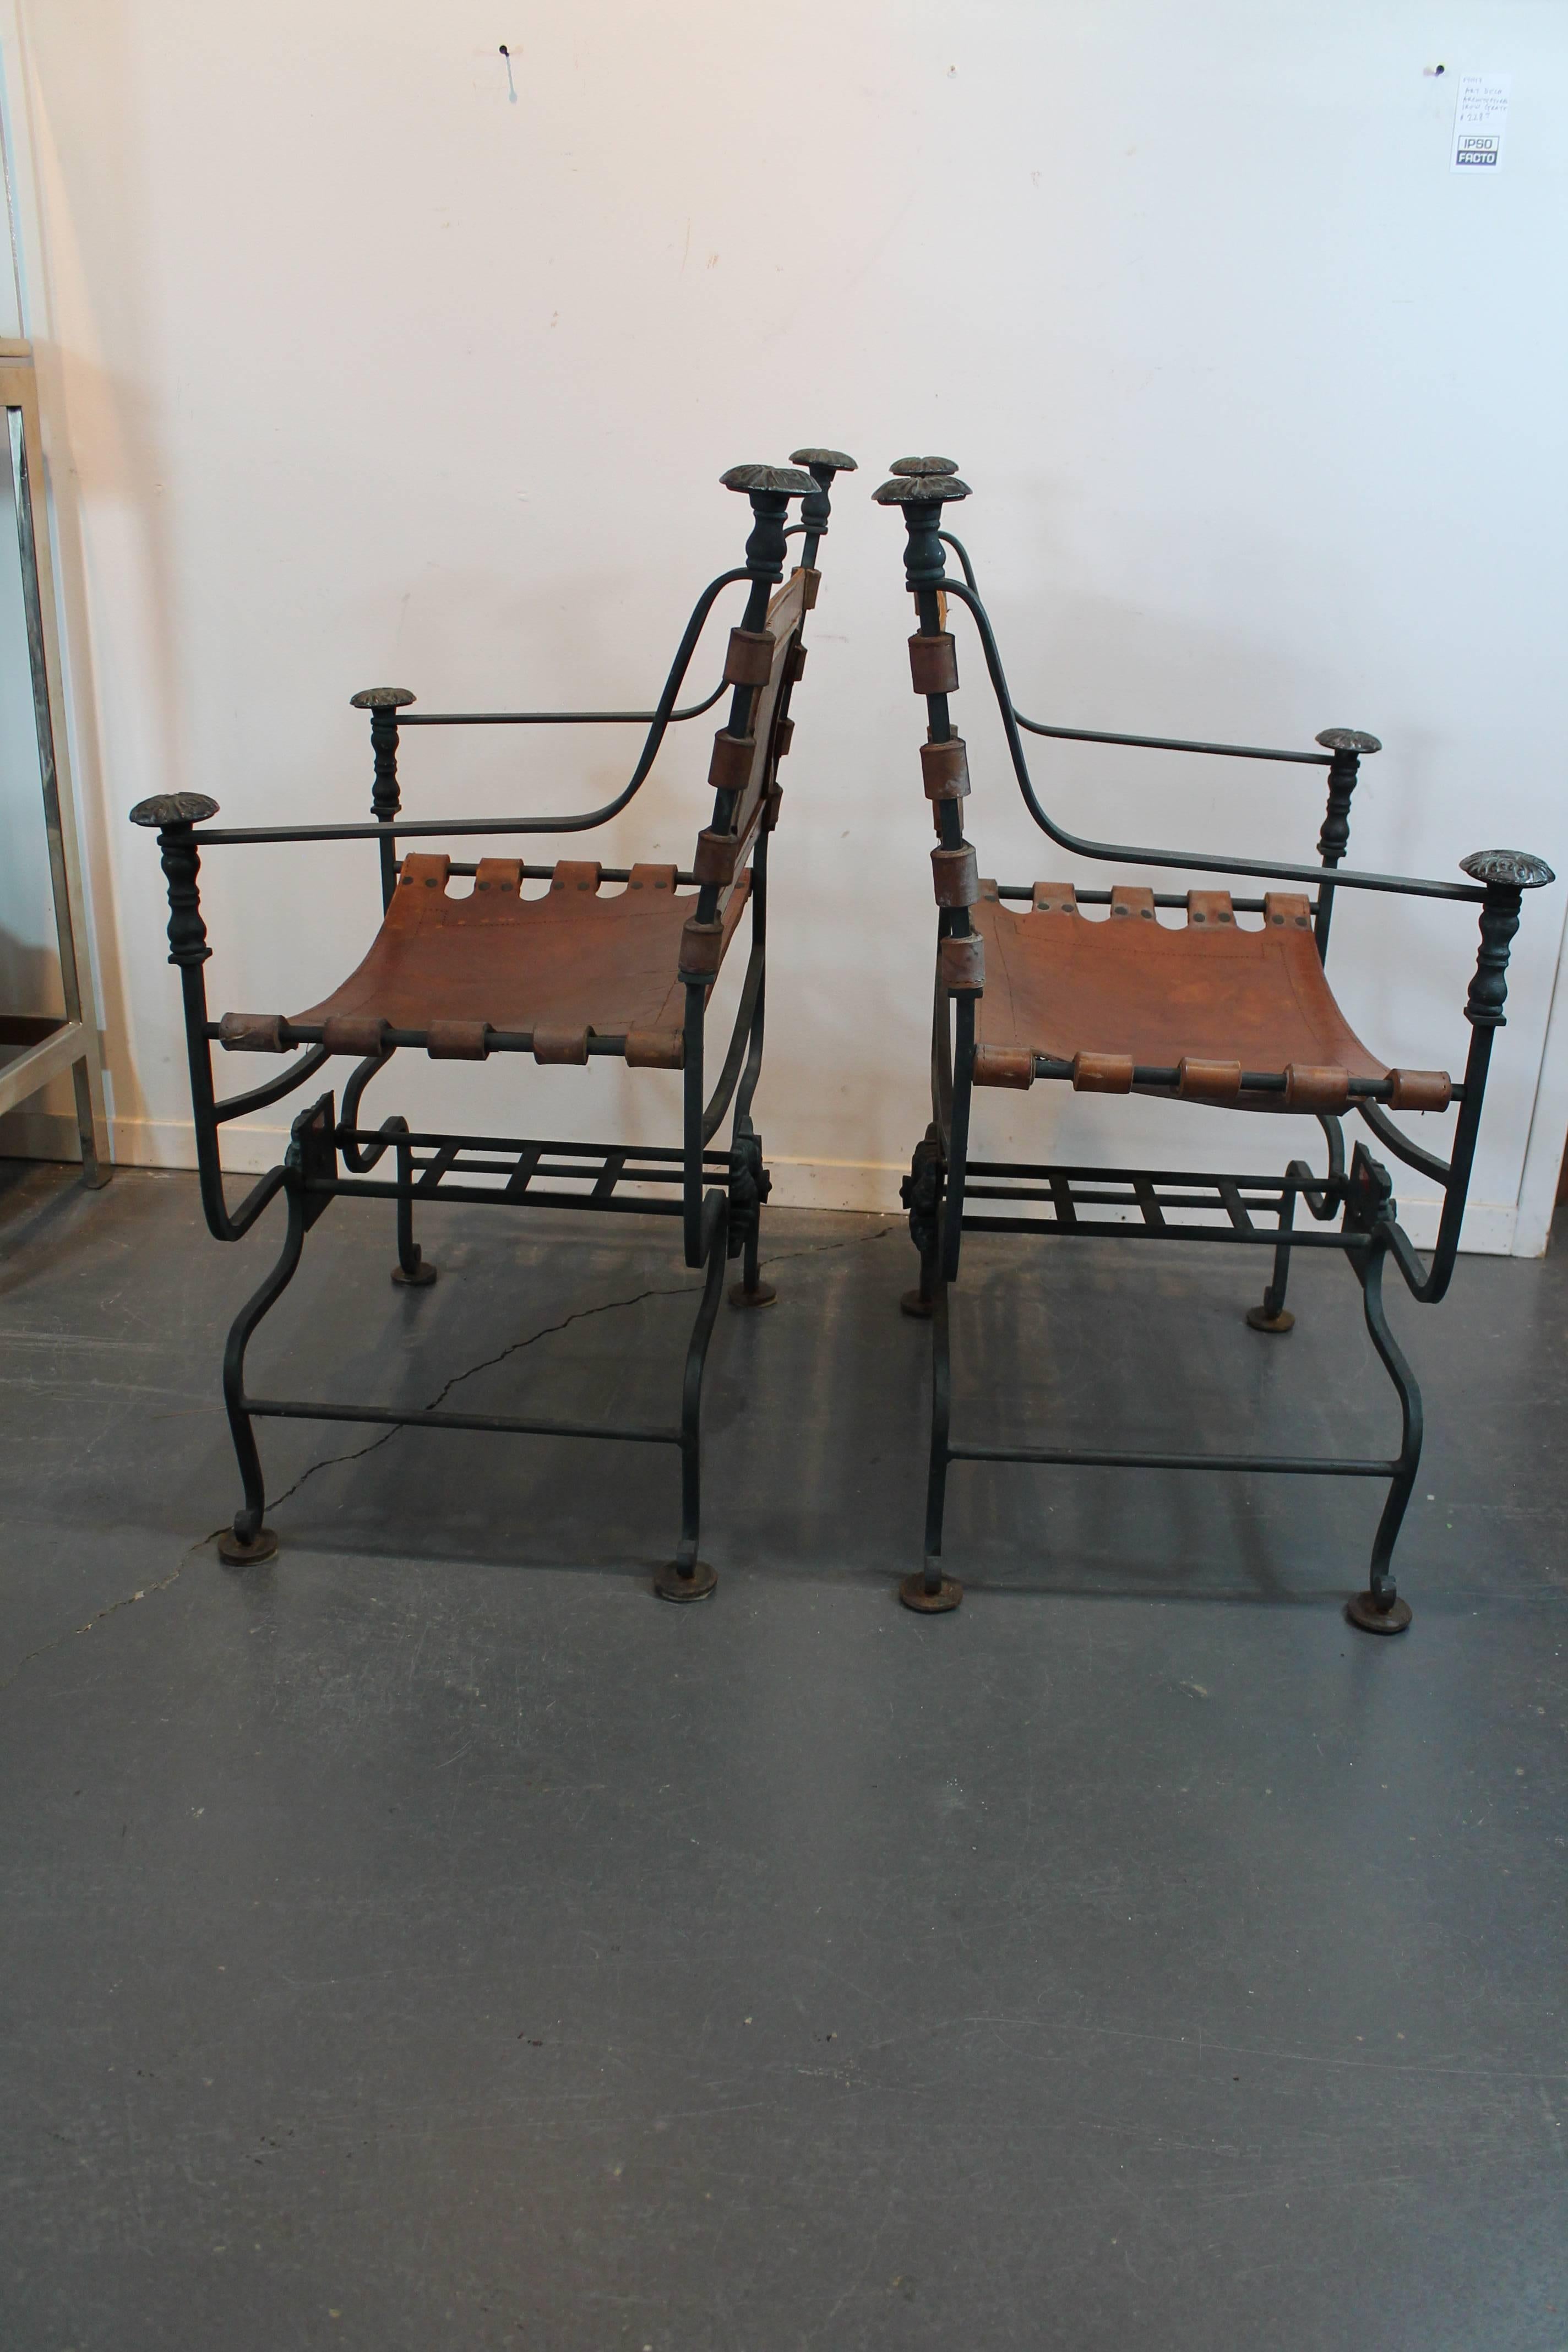 Strong graphic pair of mid-20th century iron and thick leather Savonarola chairs with great patina on the cast bronze medallions and finials.